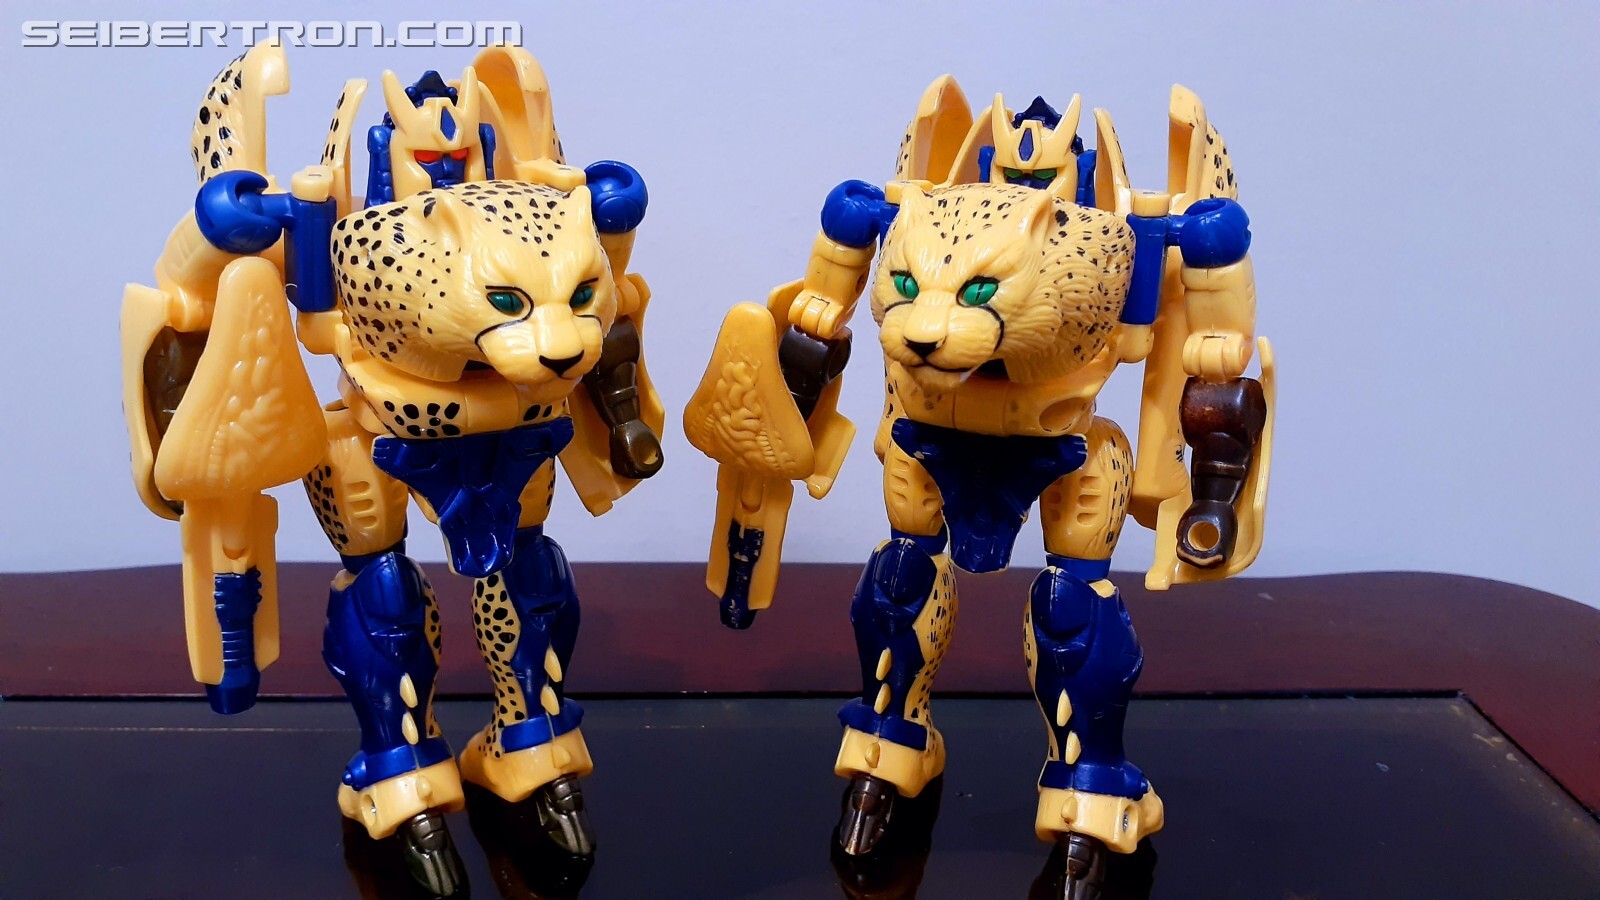 Pictorial Review of 2021 Beast Wars Cheetor Reissue with